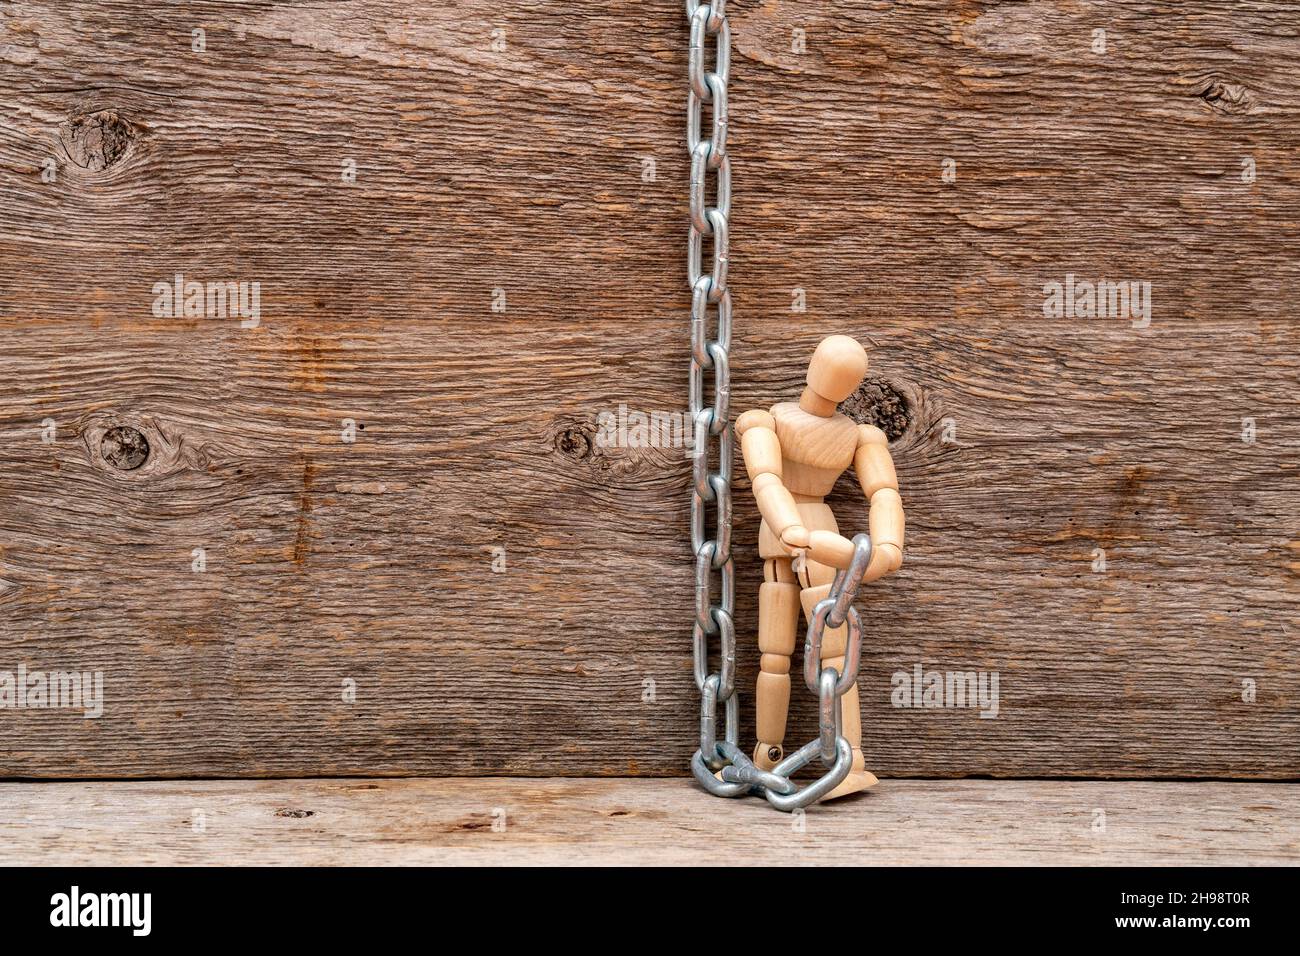 Wooden mannequin with a metal chain on wooden background. Get freedom. Stock Photo